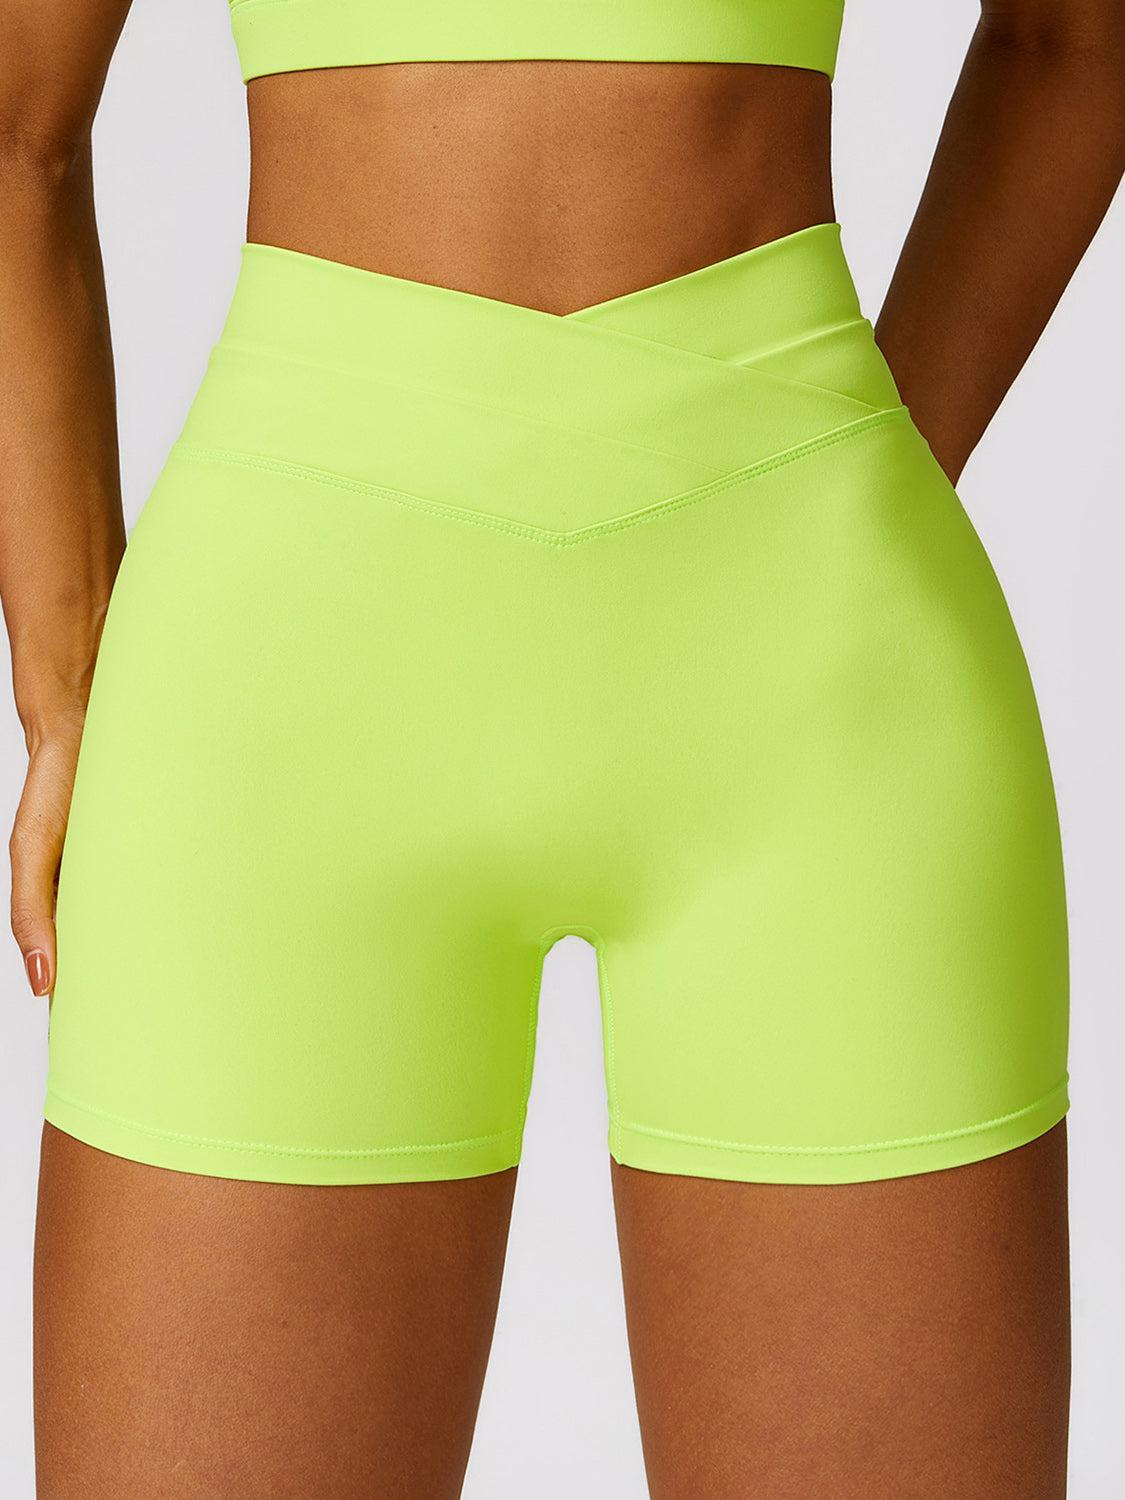 a woman in a neon green sports bra top and shorts